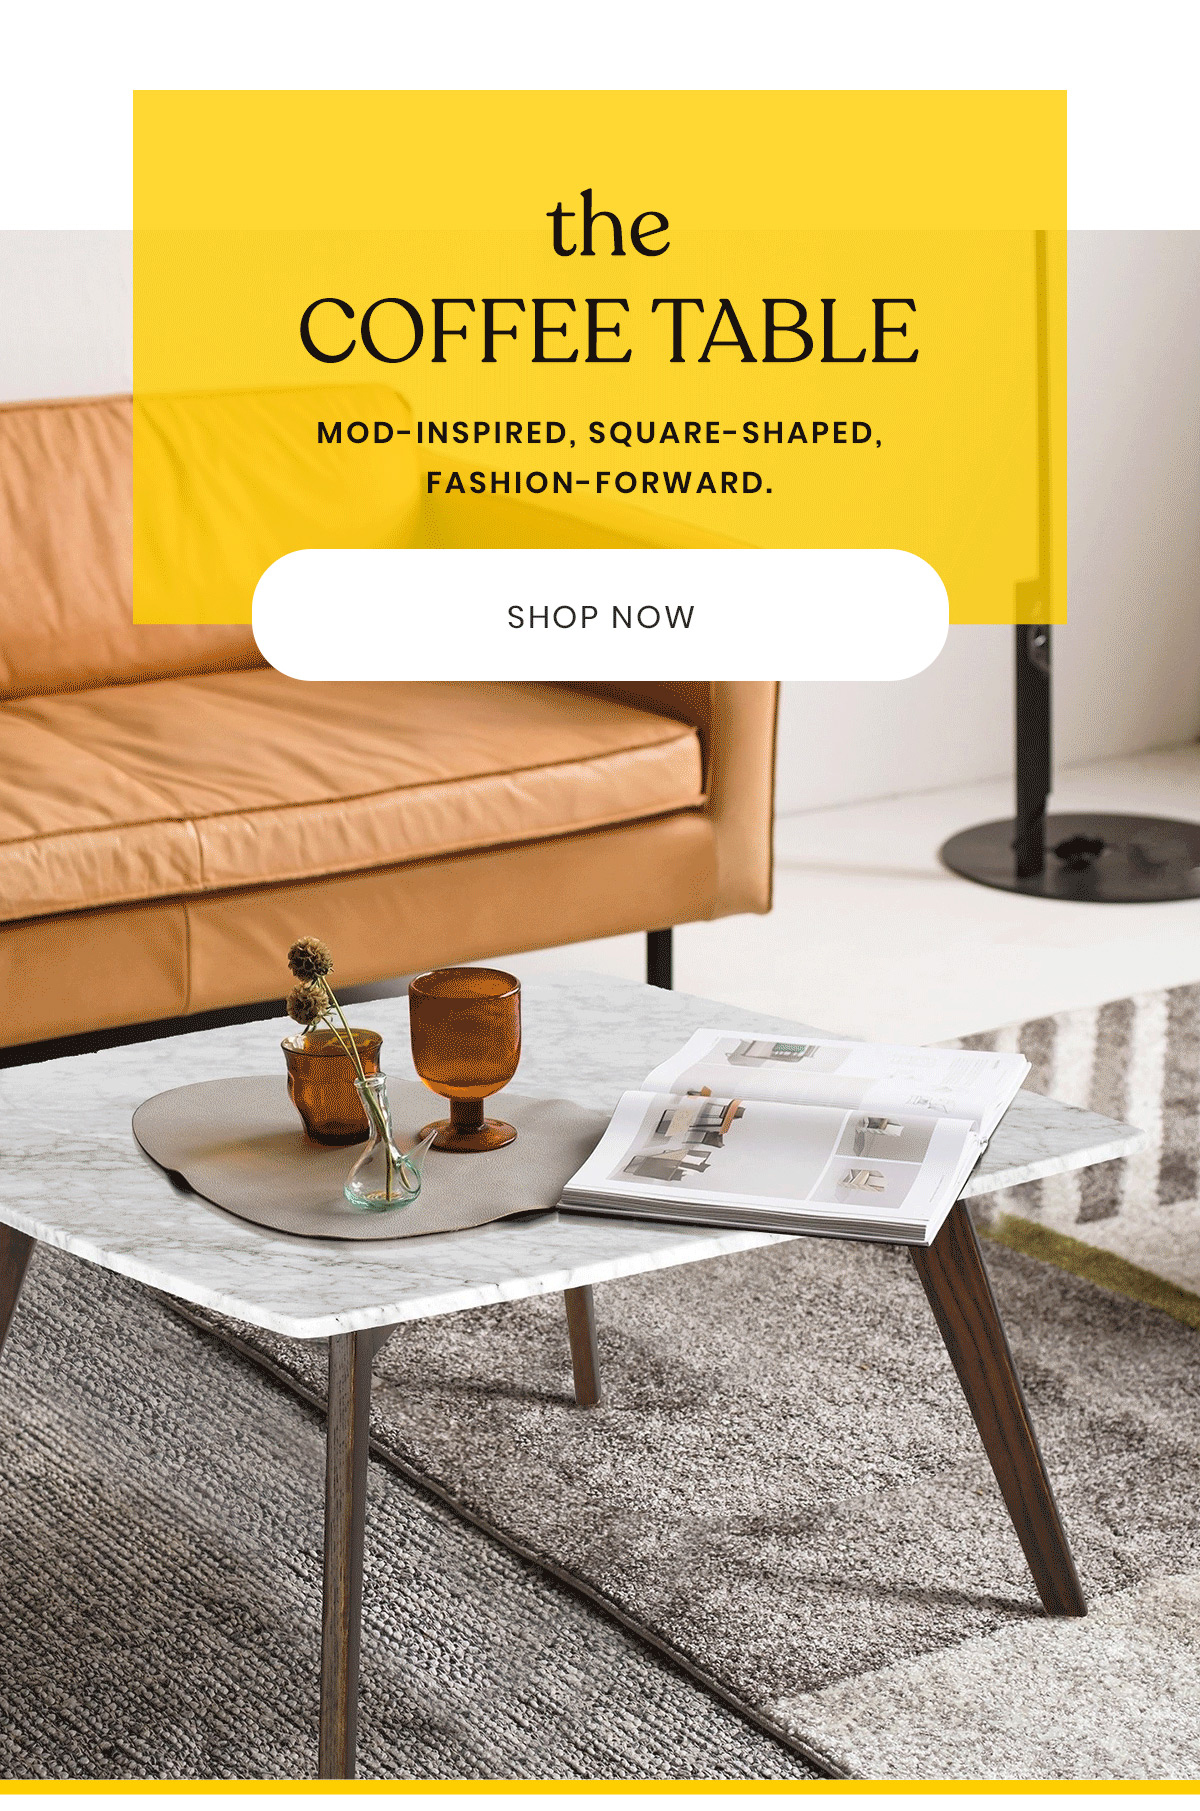 The Coffee Table - Mod-inspired, square-shaped, fashion-forward